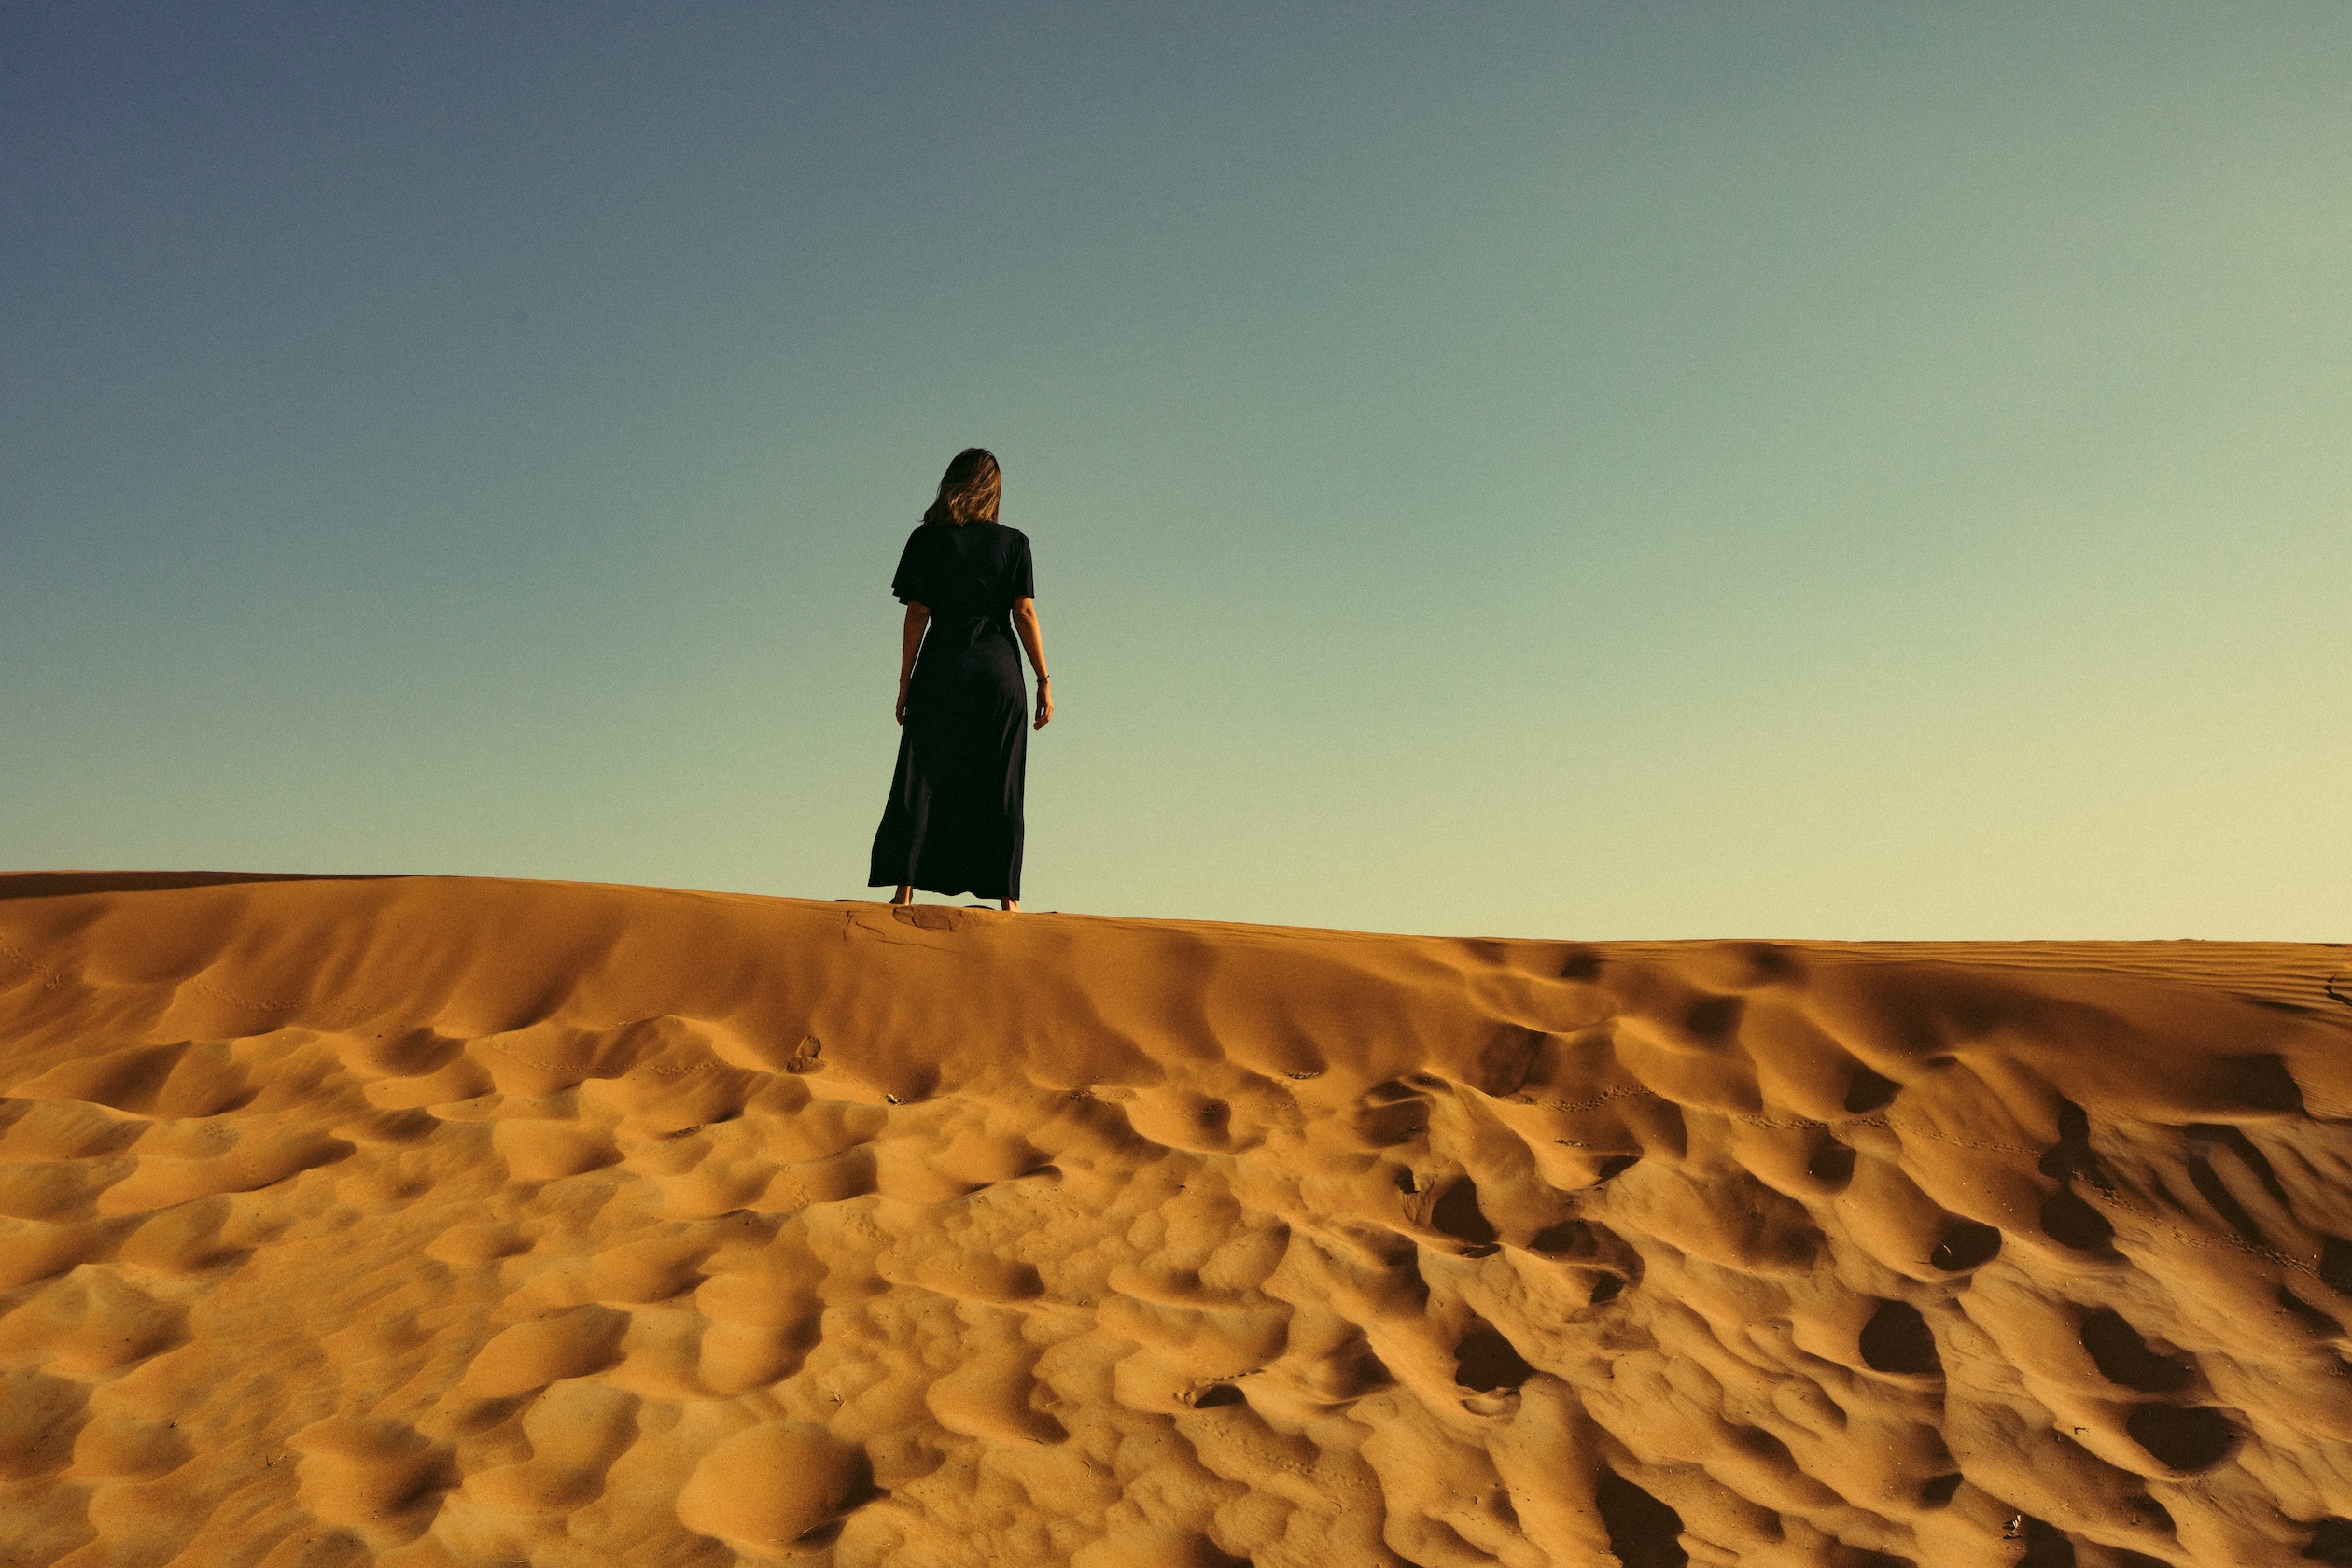 Photo of a person standing alone in the desert.